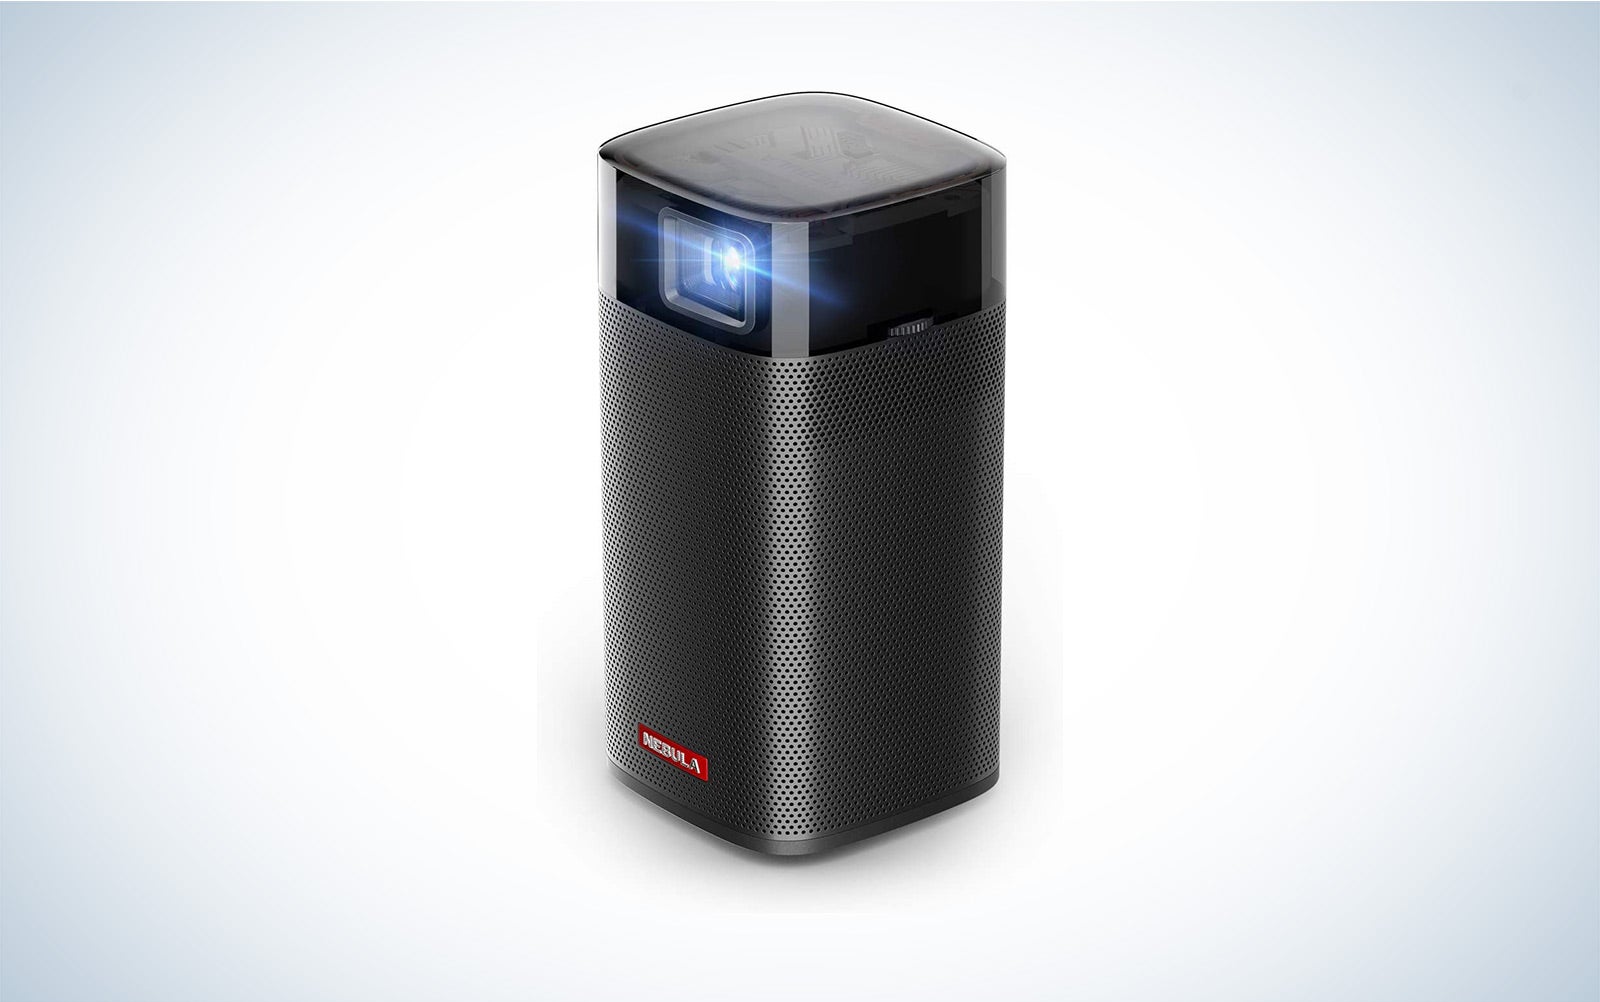 The Anker Nebula Apollo is the best portable projector.